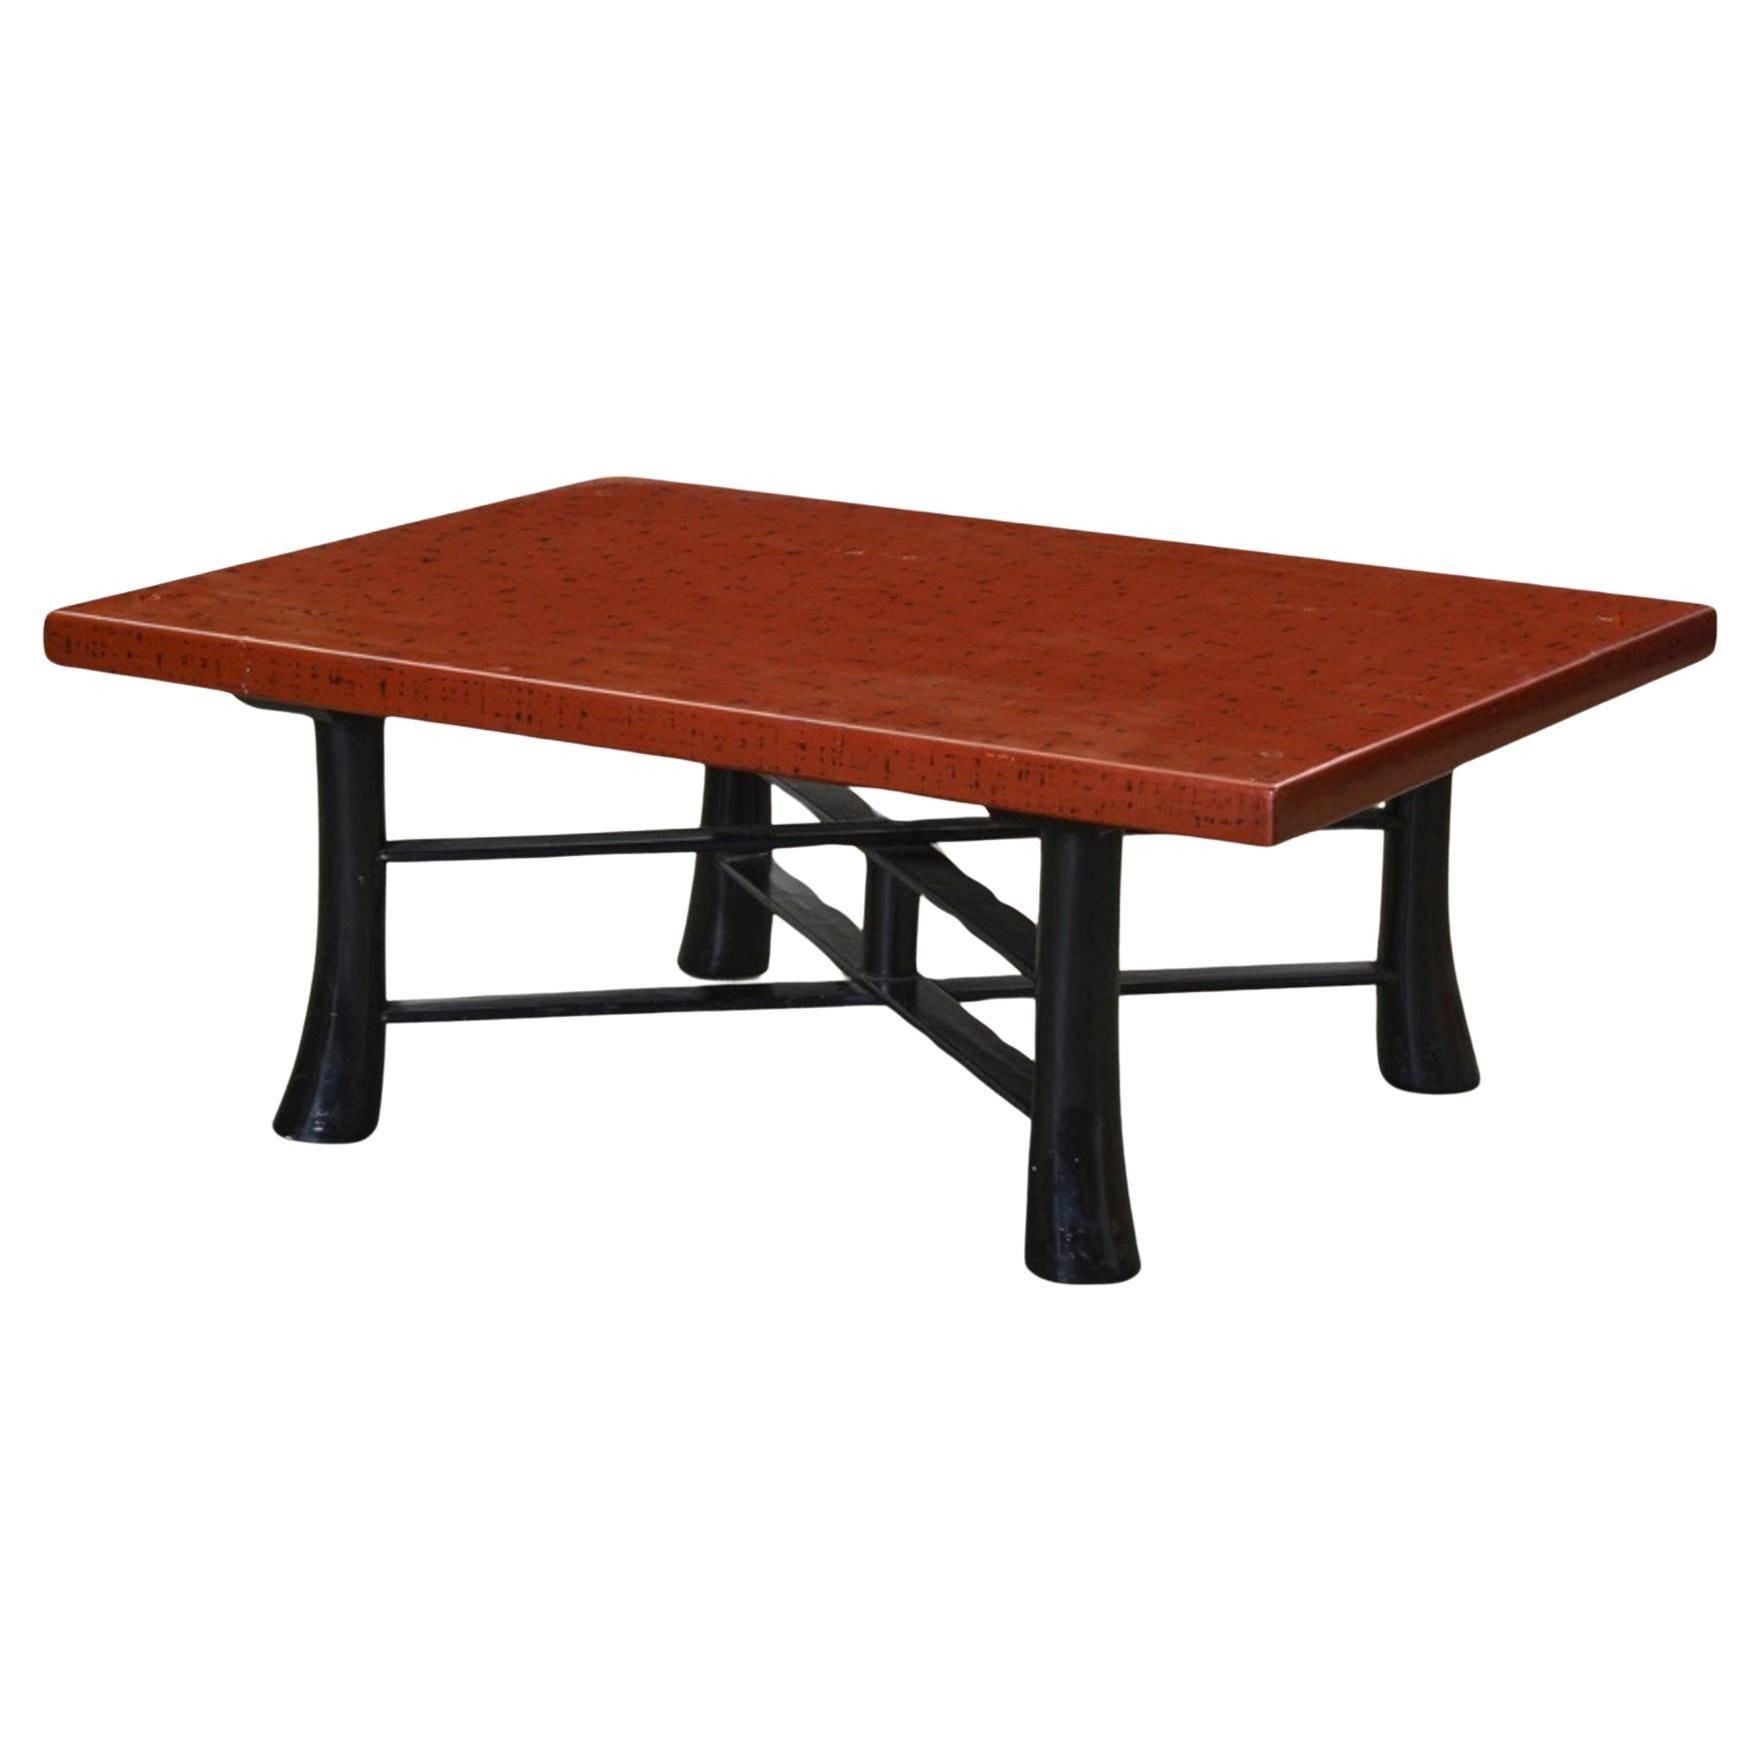 Japanese Negoro Lacquer Coffee Table For Sale